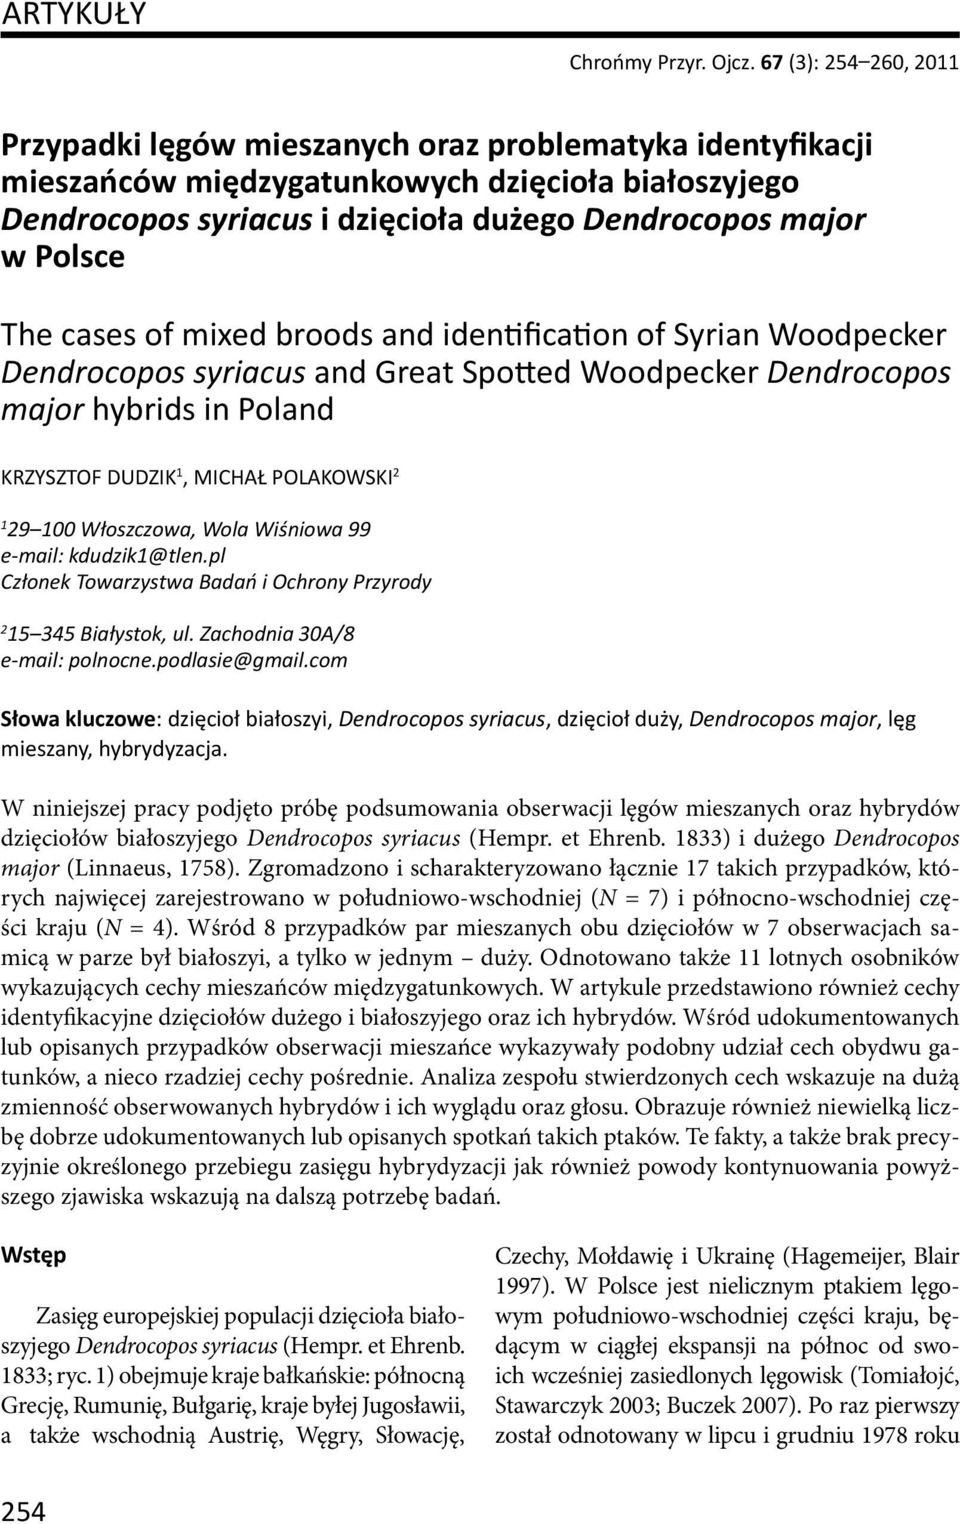 The cases of mixed broods and iden fica on of Syrian Woodpecker Dendrocopos syriacus and Great Spo ed Woodpecker Dendrocopos major hybrids in Poland KRZYSZTOF DUDZIK 1, MICHAŁ POLAKOWSKI 2 1 29 100